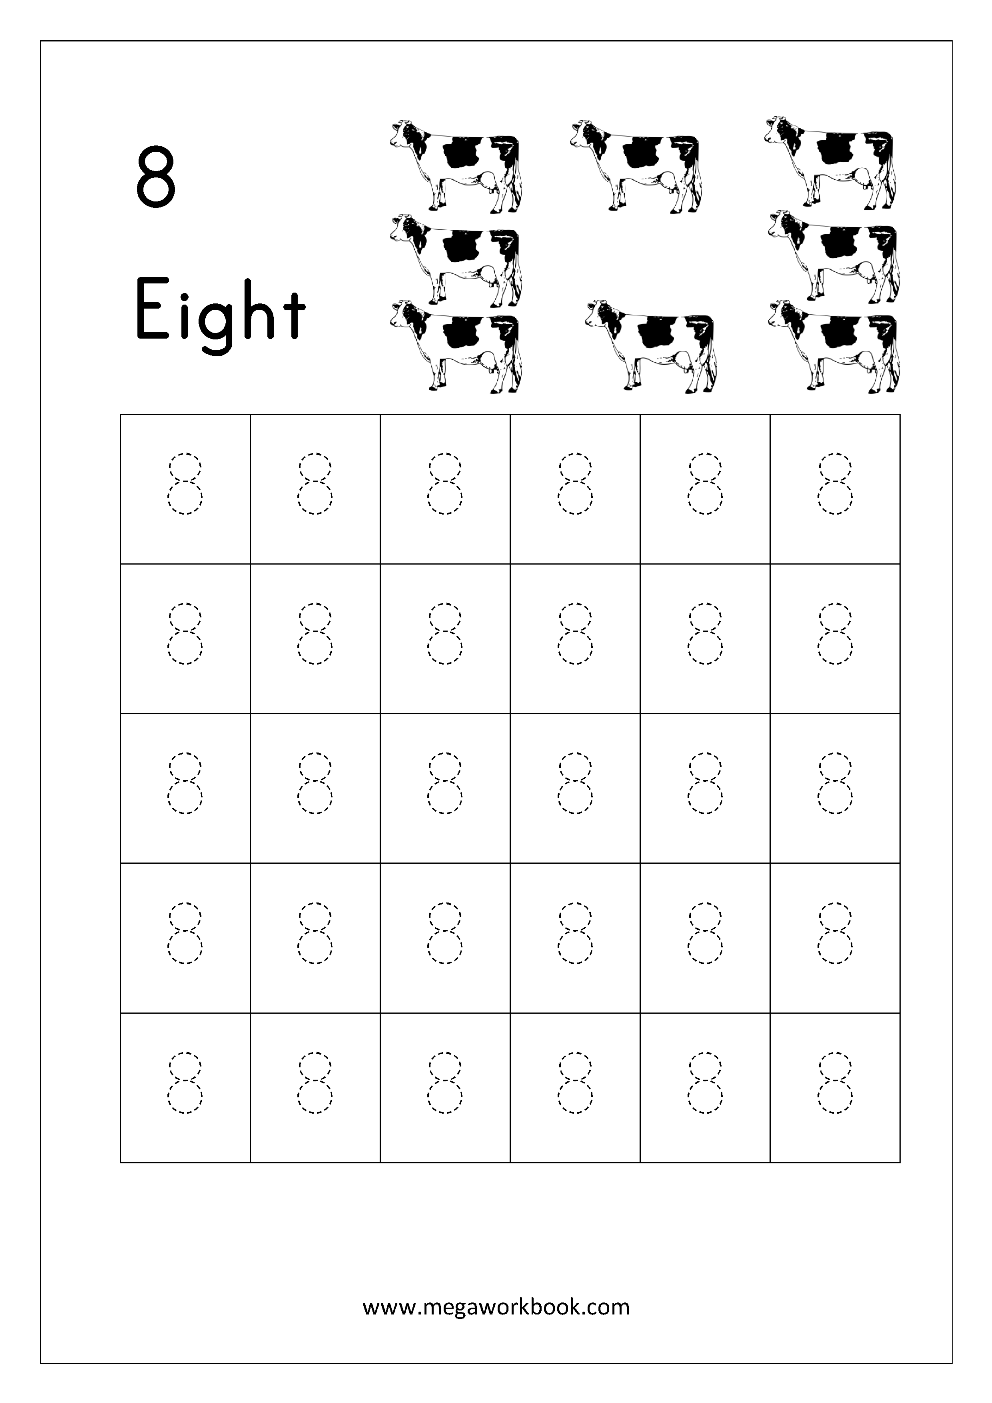 math-worksheet-number-tracing-1-to-10-writing-worksheets-numbers